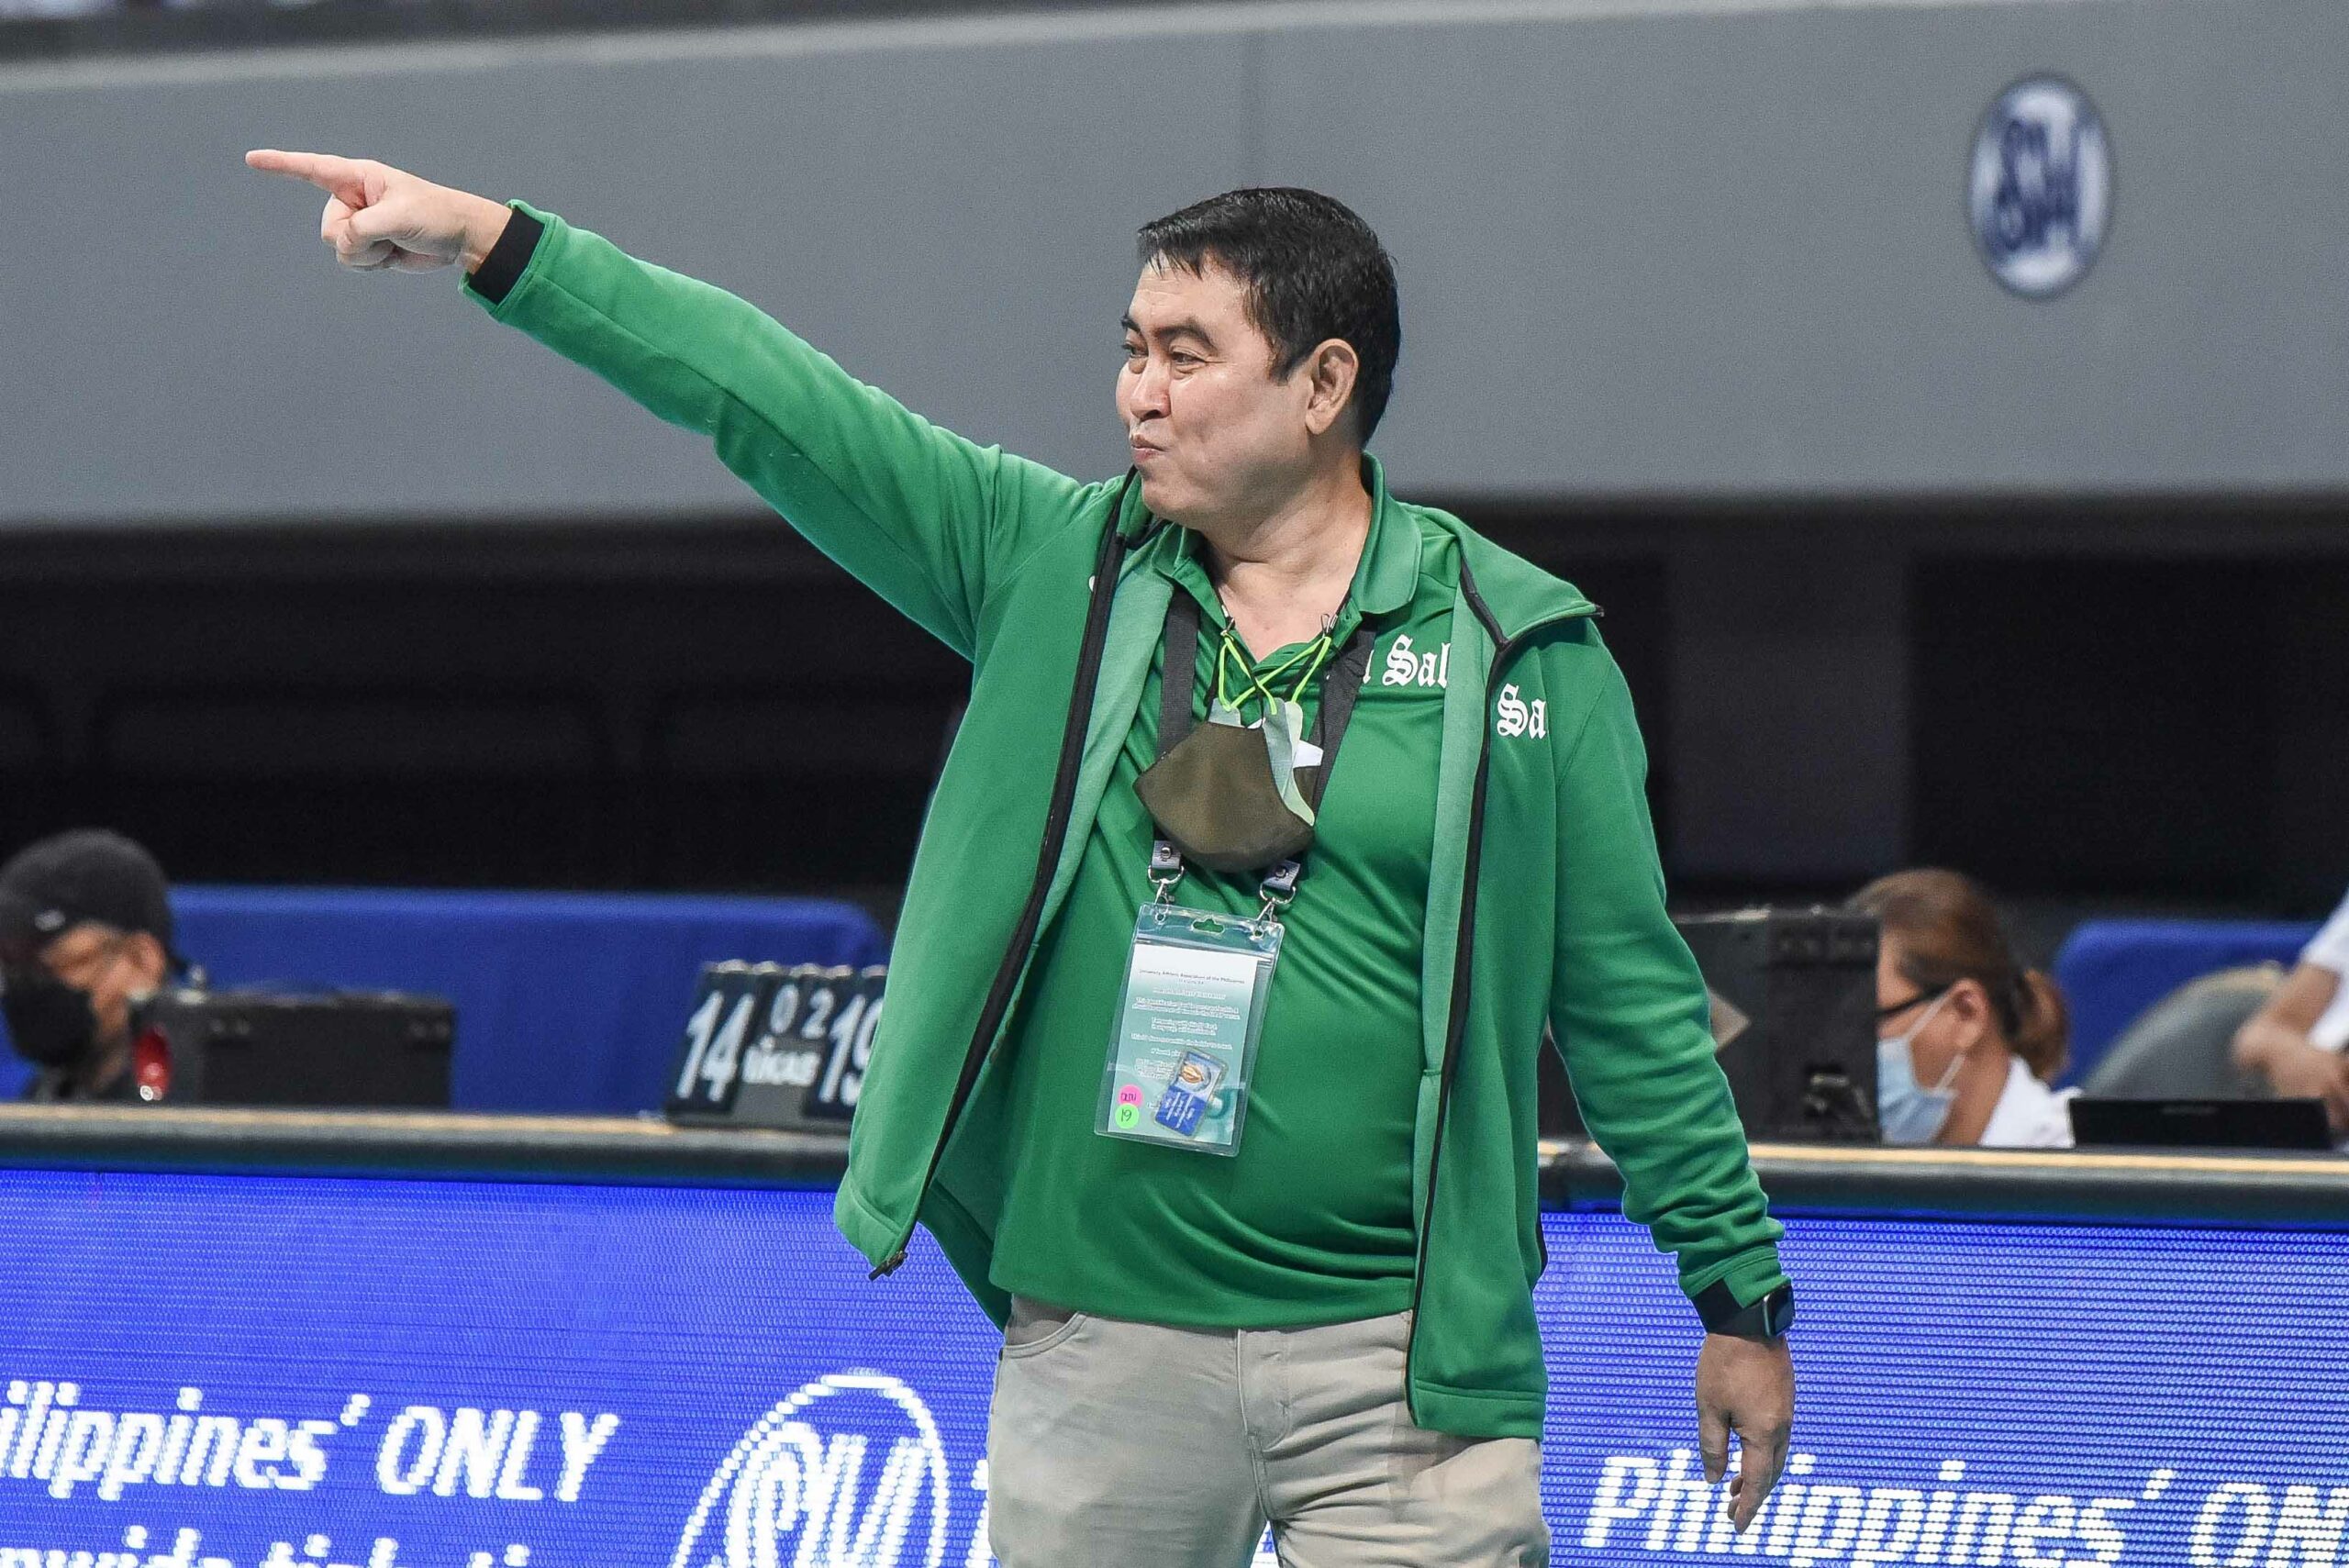 UAAP-Season-84-Womens-Volleyball-DLSU-vs-Ateneo-Ramil-De-Jesus-1-scaled Malaluan assures DLSU will not just settle for second: 'Hindi pa kami tapos' DLSU News UAAP Volleyball  - philippine sports news